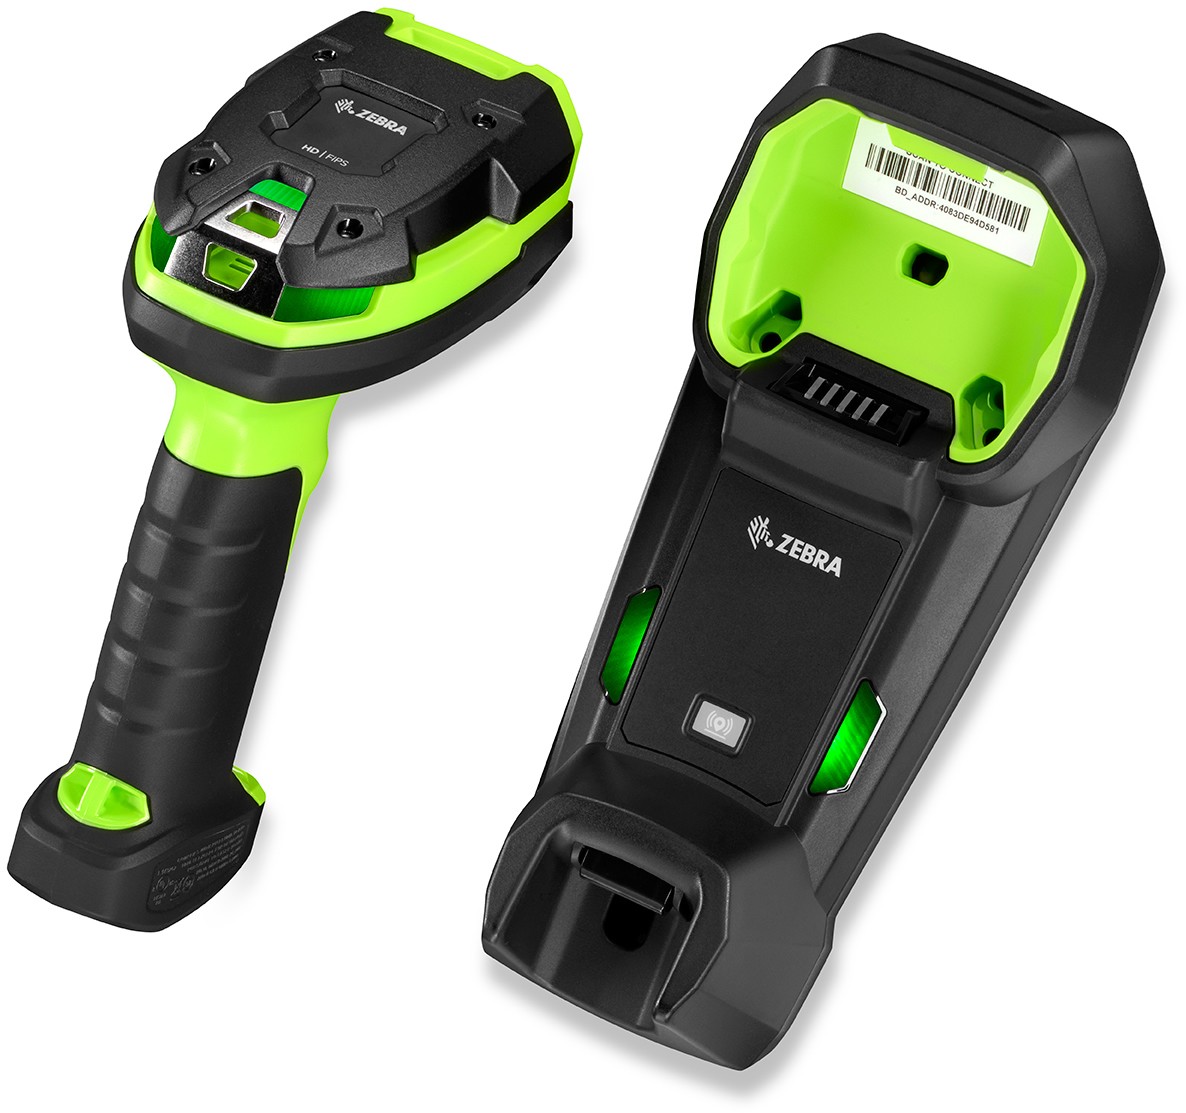 Ds3608-Hp Rugged Green Vibration Motor Usb Kit: Ds3608-Hp20003Vzww Scanner, Cba-U46-S07Zar High Current Shielded Usb Cable